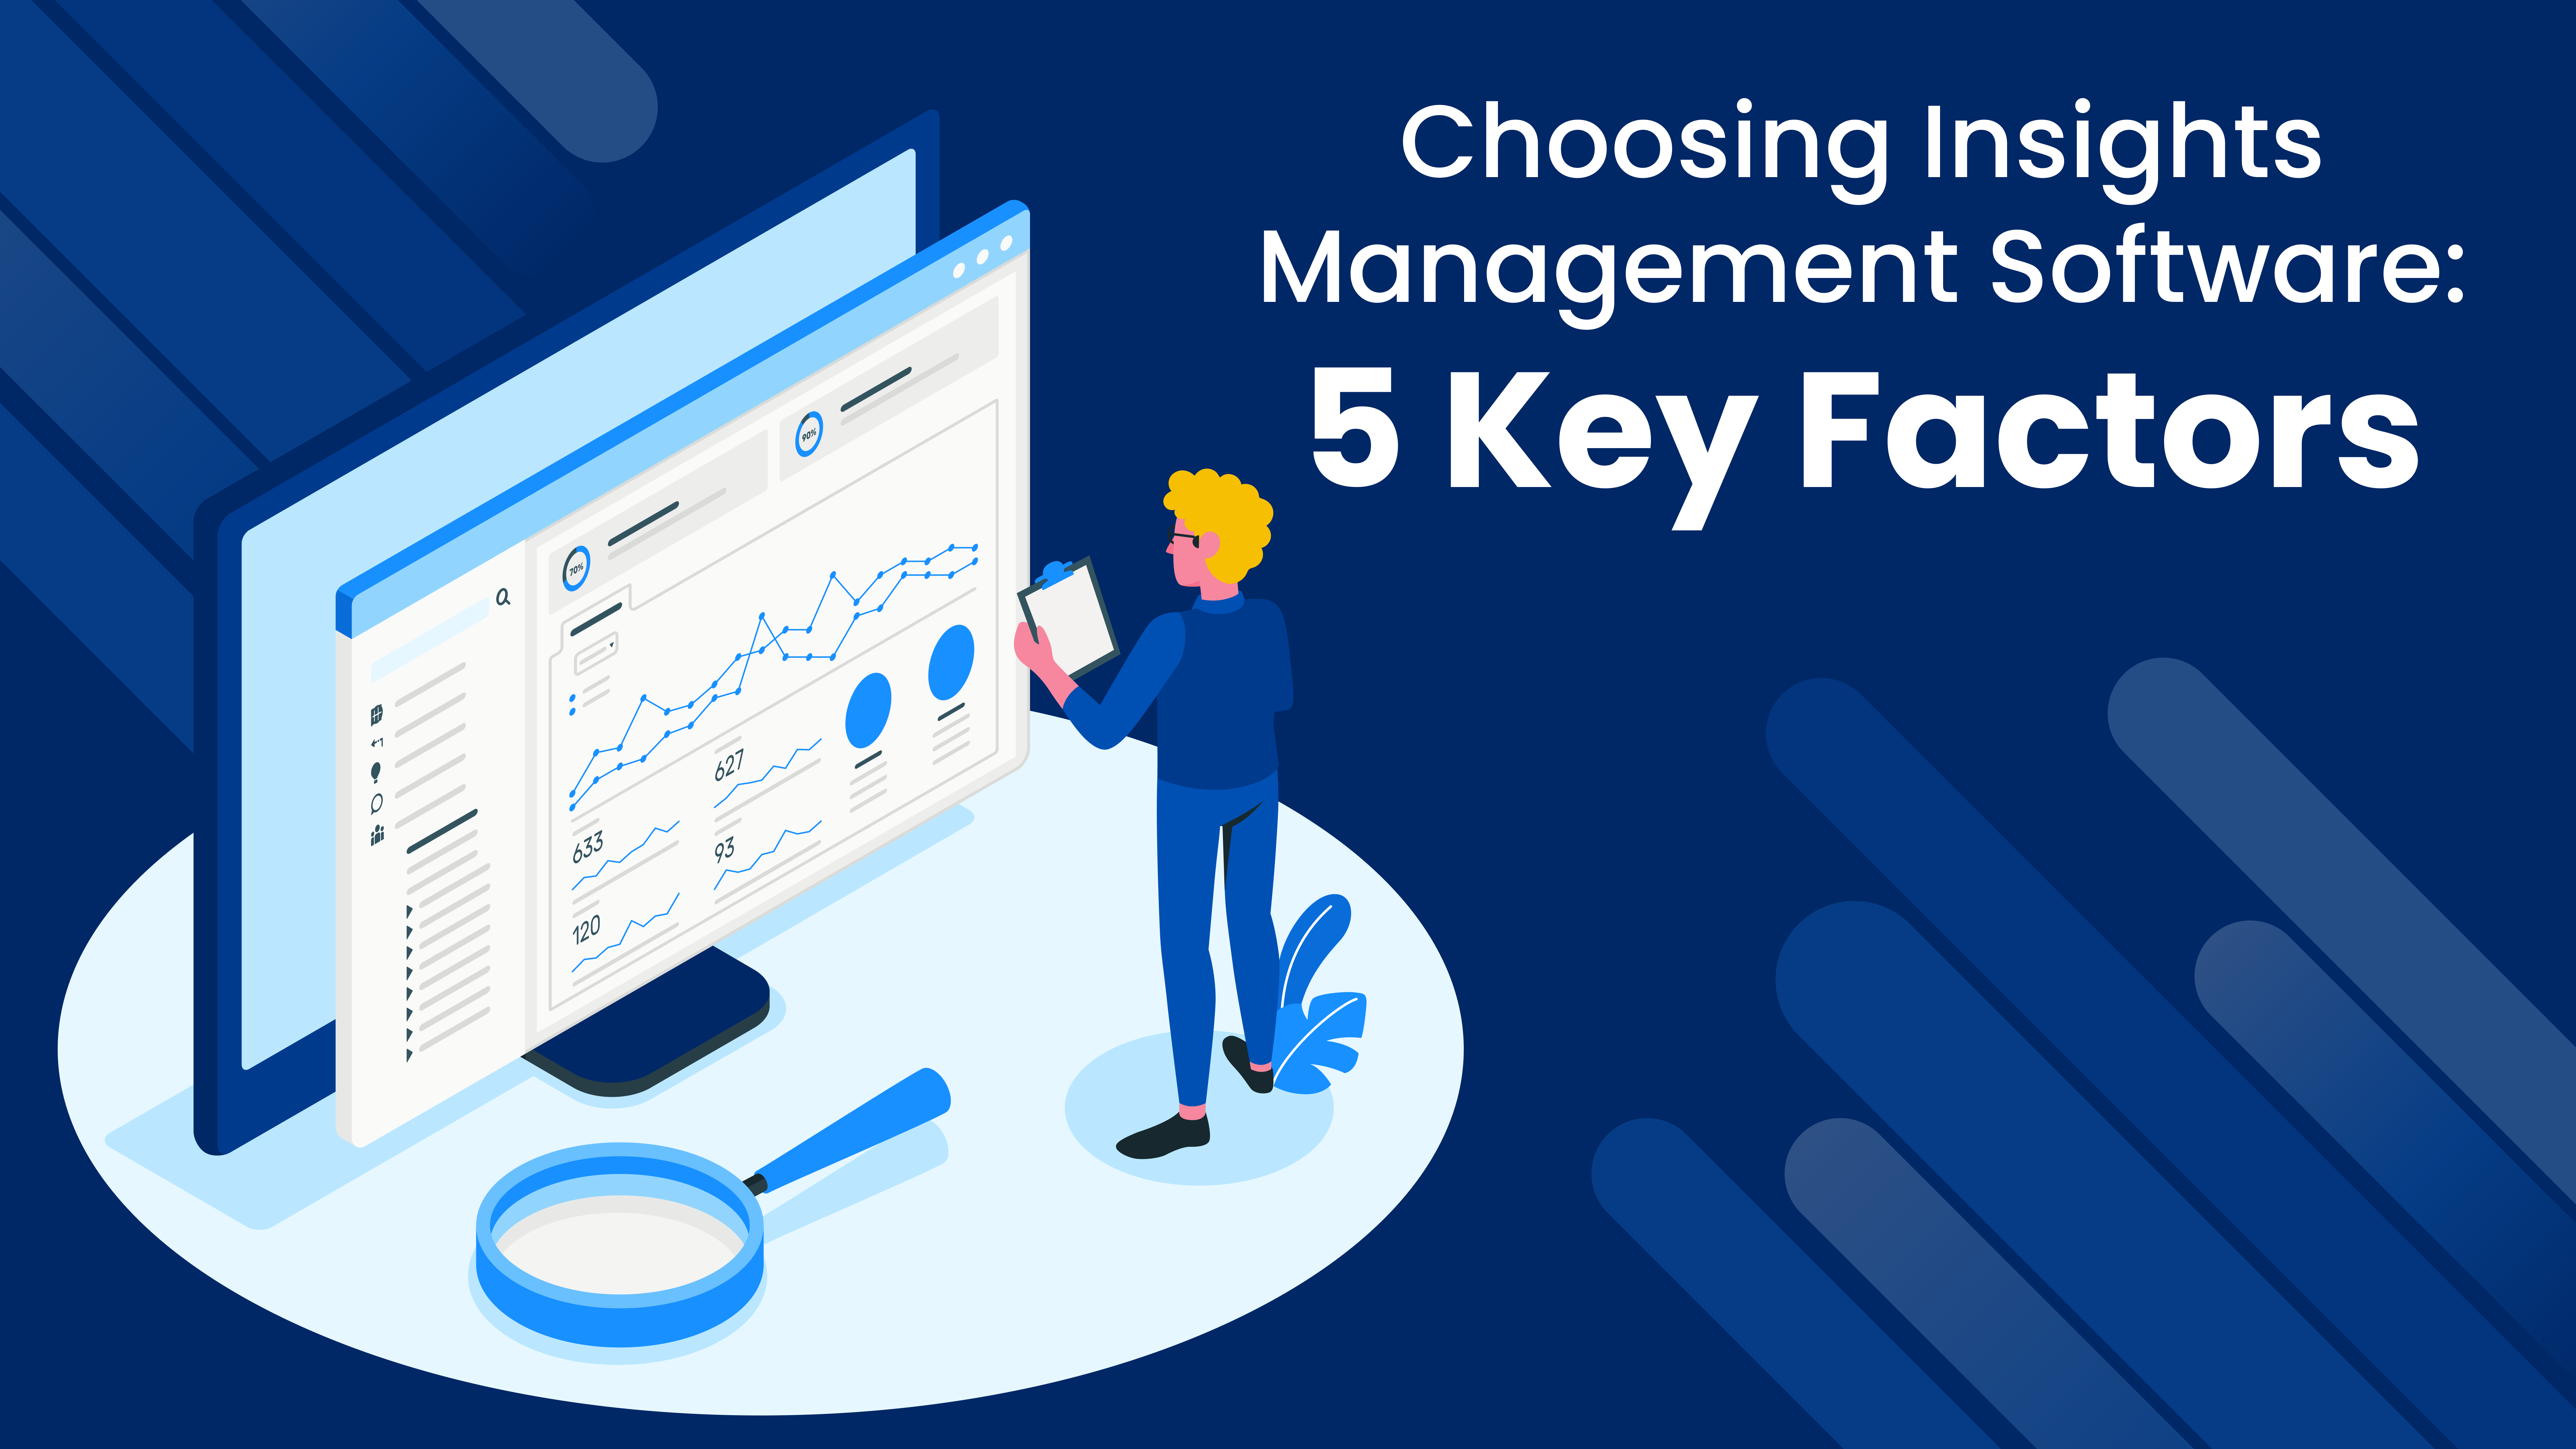 5 Things to Look For When Choosing Insights Management Software